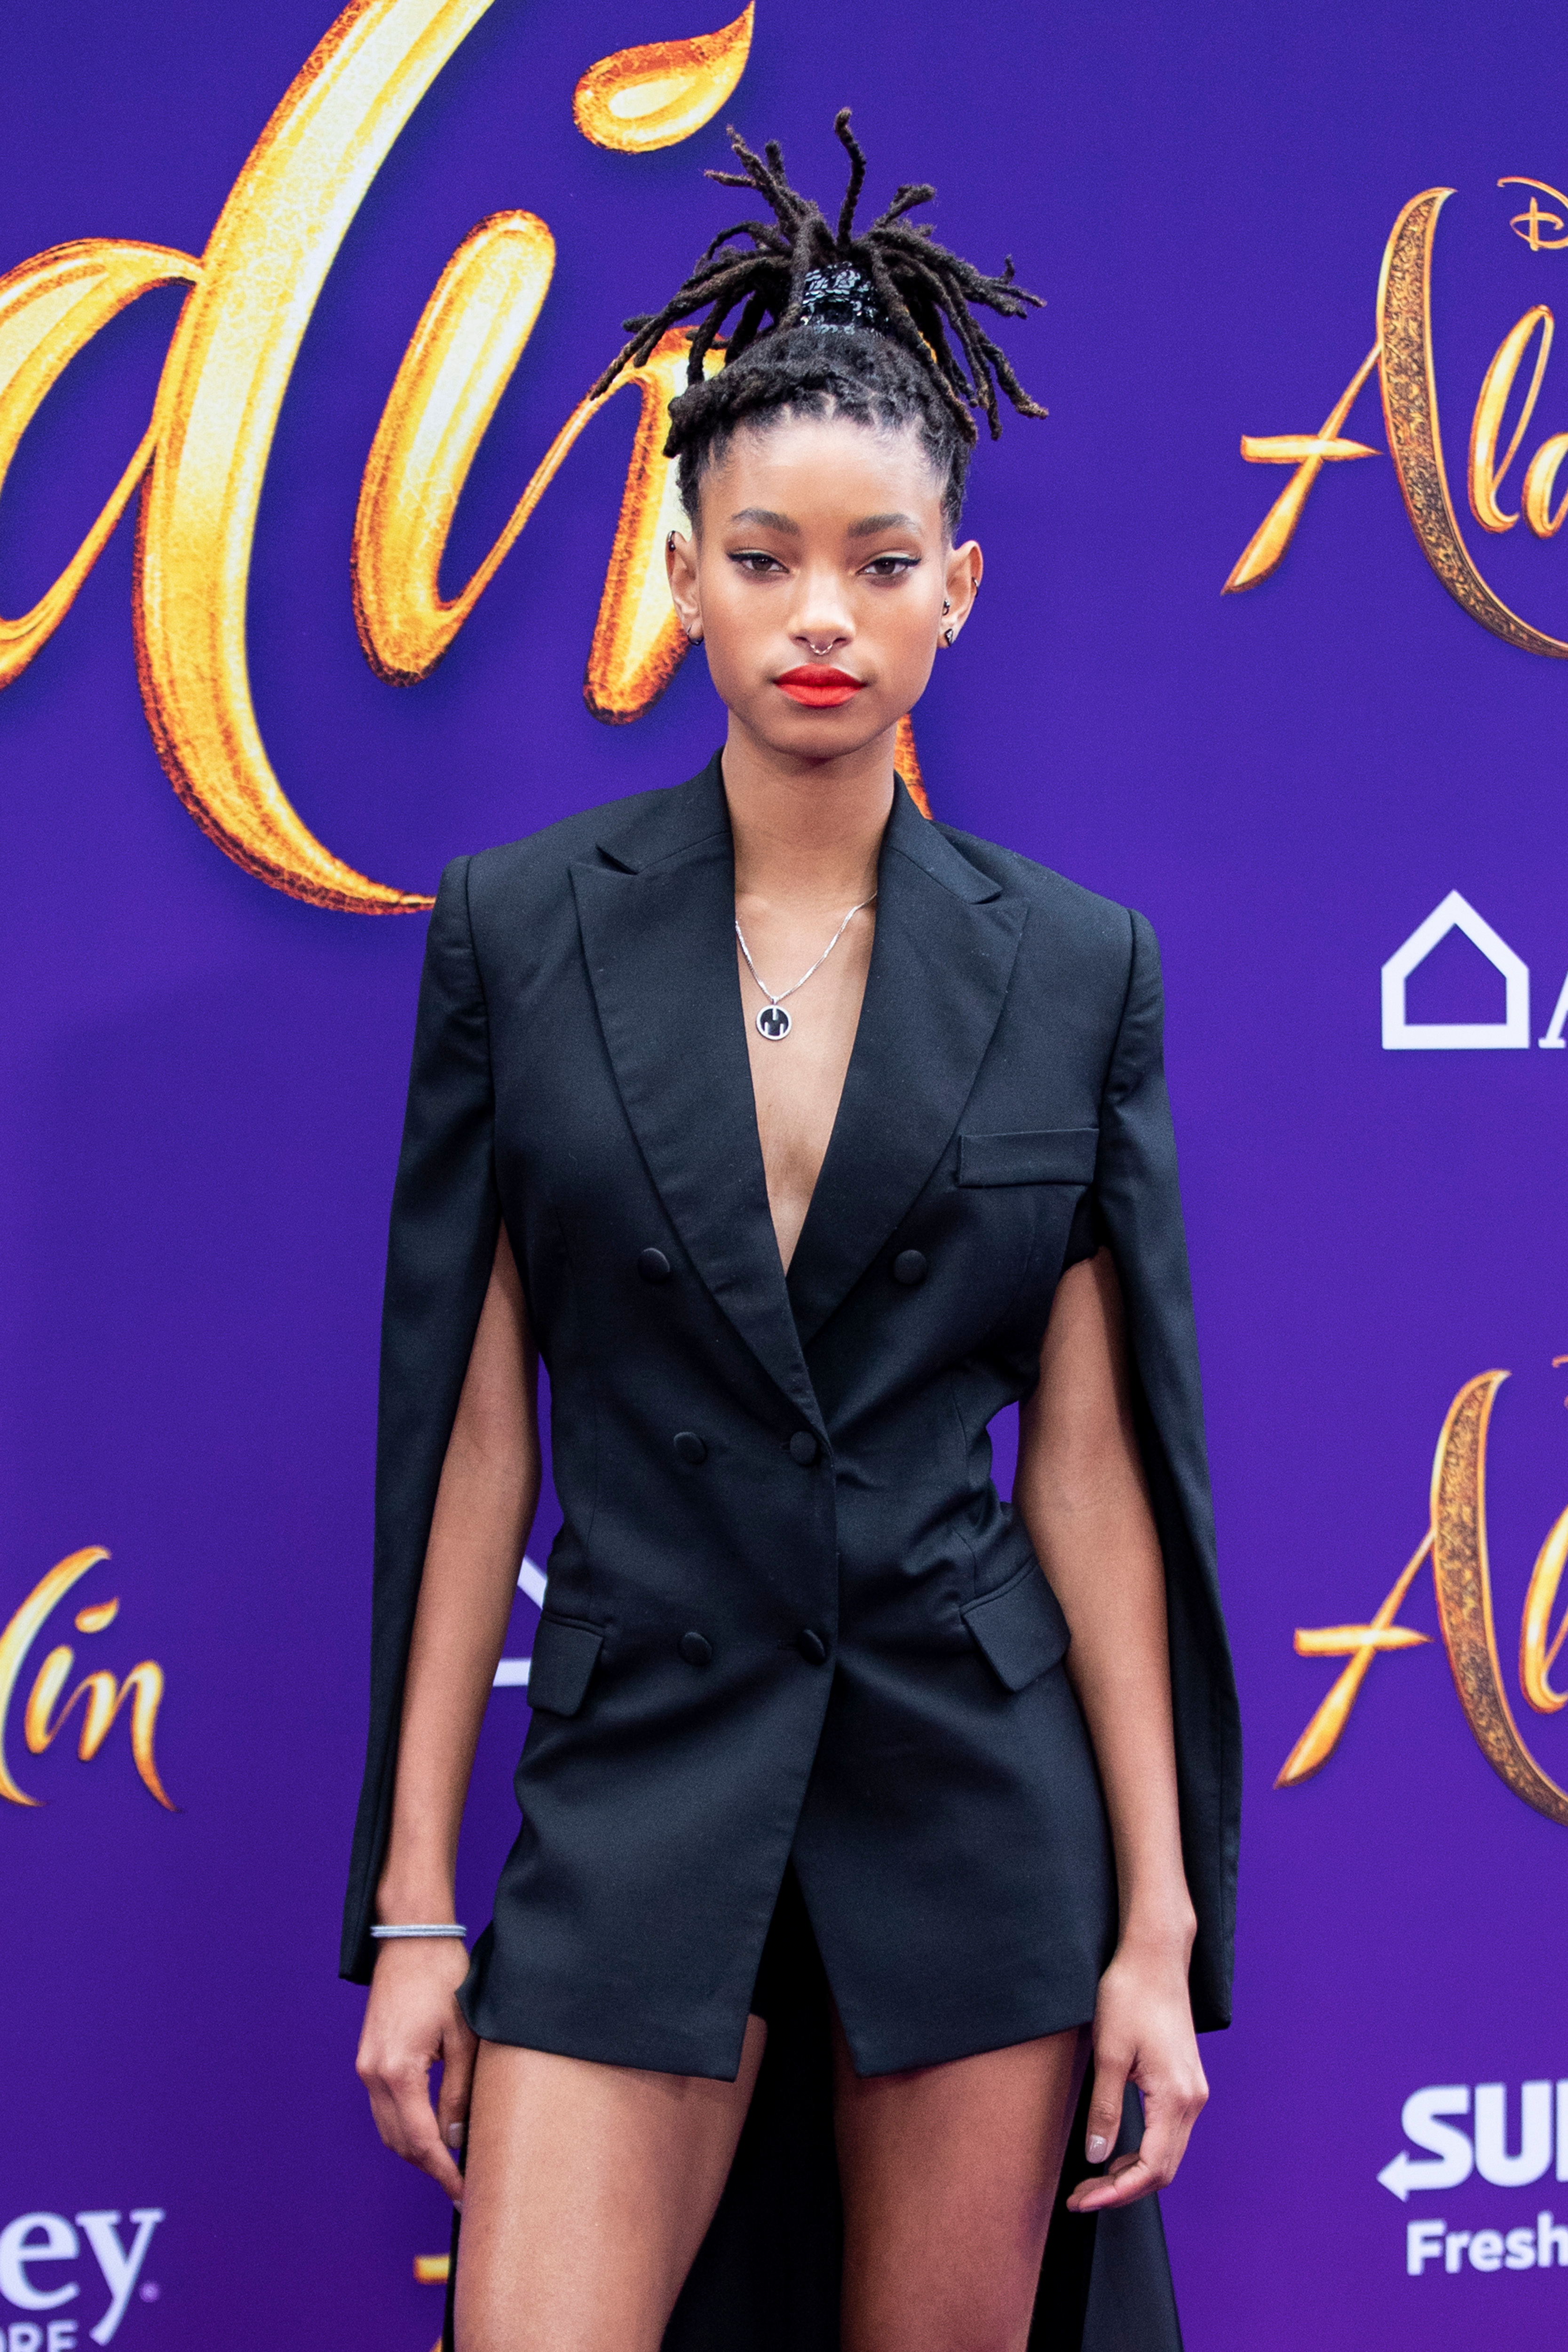 Willow Smith | Overview | Wonderwall.com